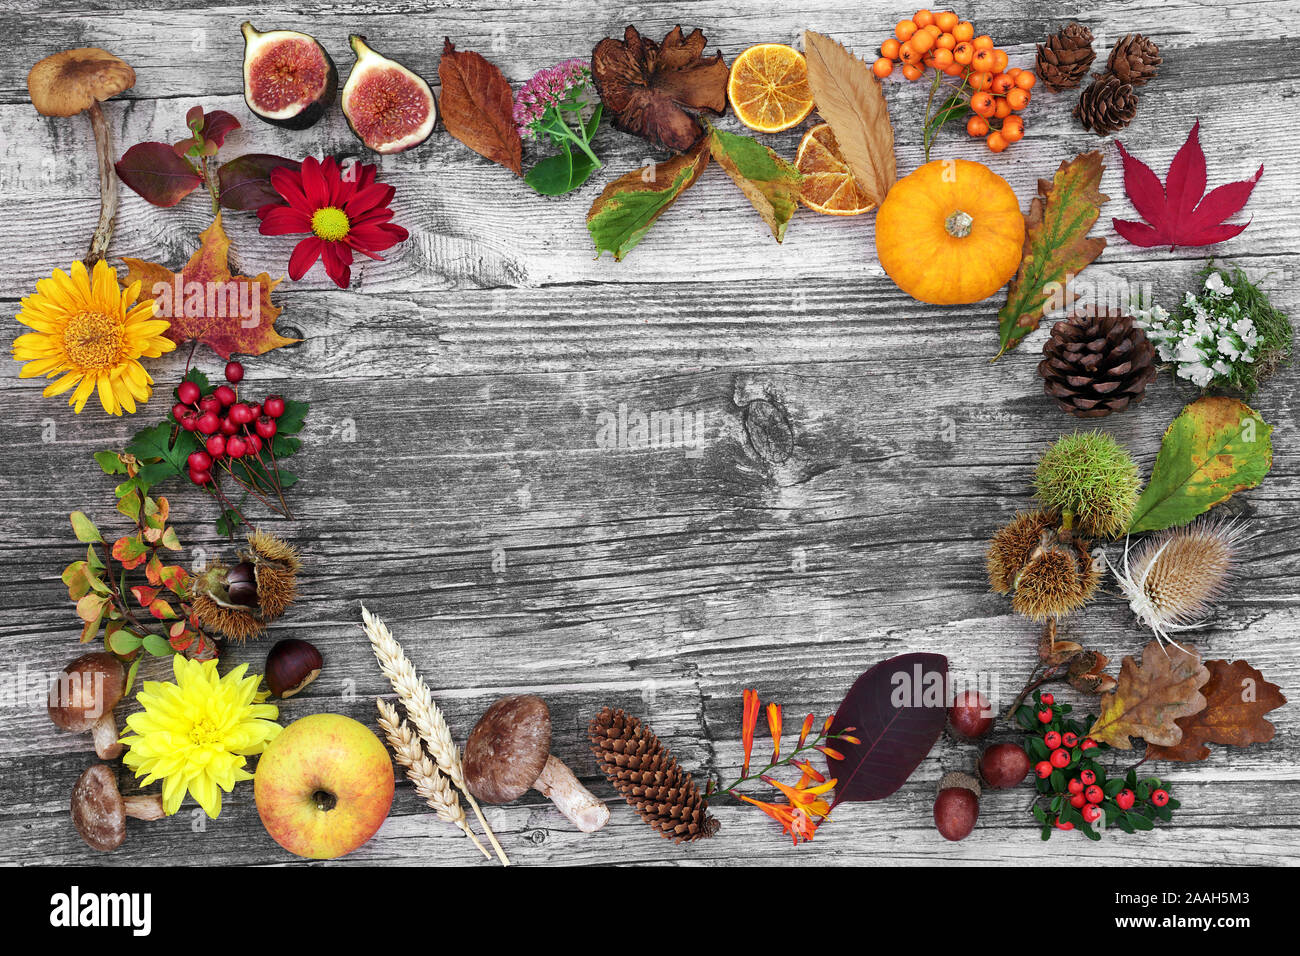 Autumn nature composition forming an abstract background border with food, flora and fauna on rustic wood. Top view. Stock Photo